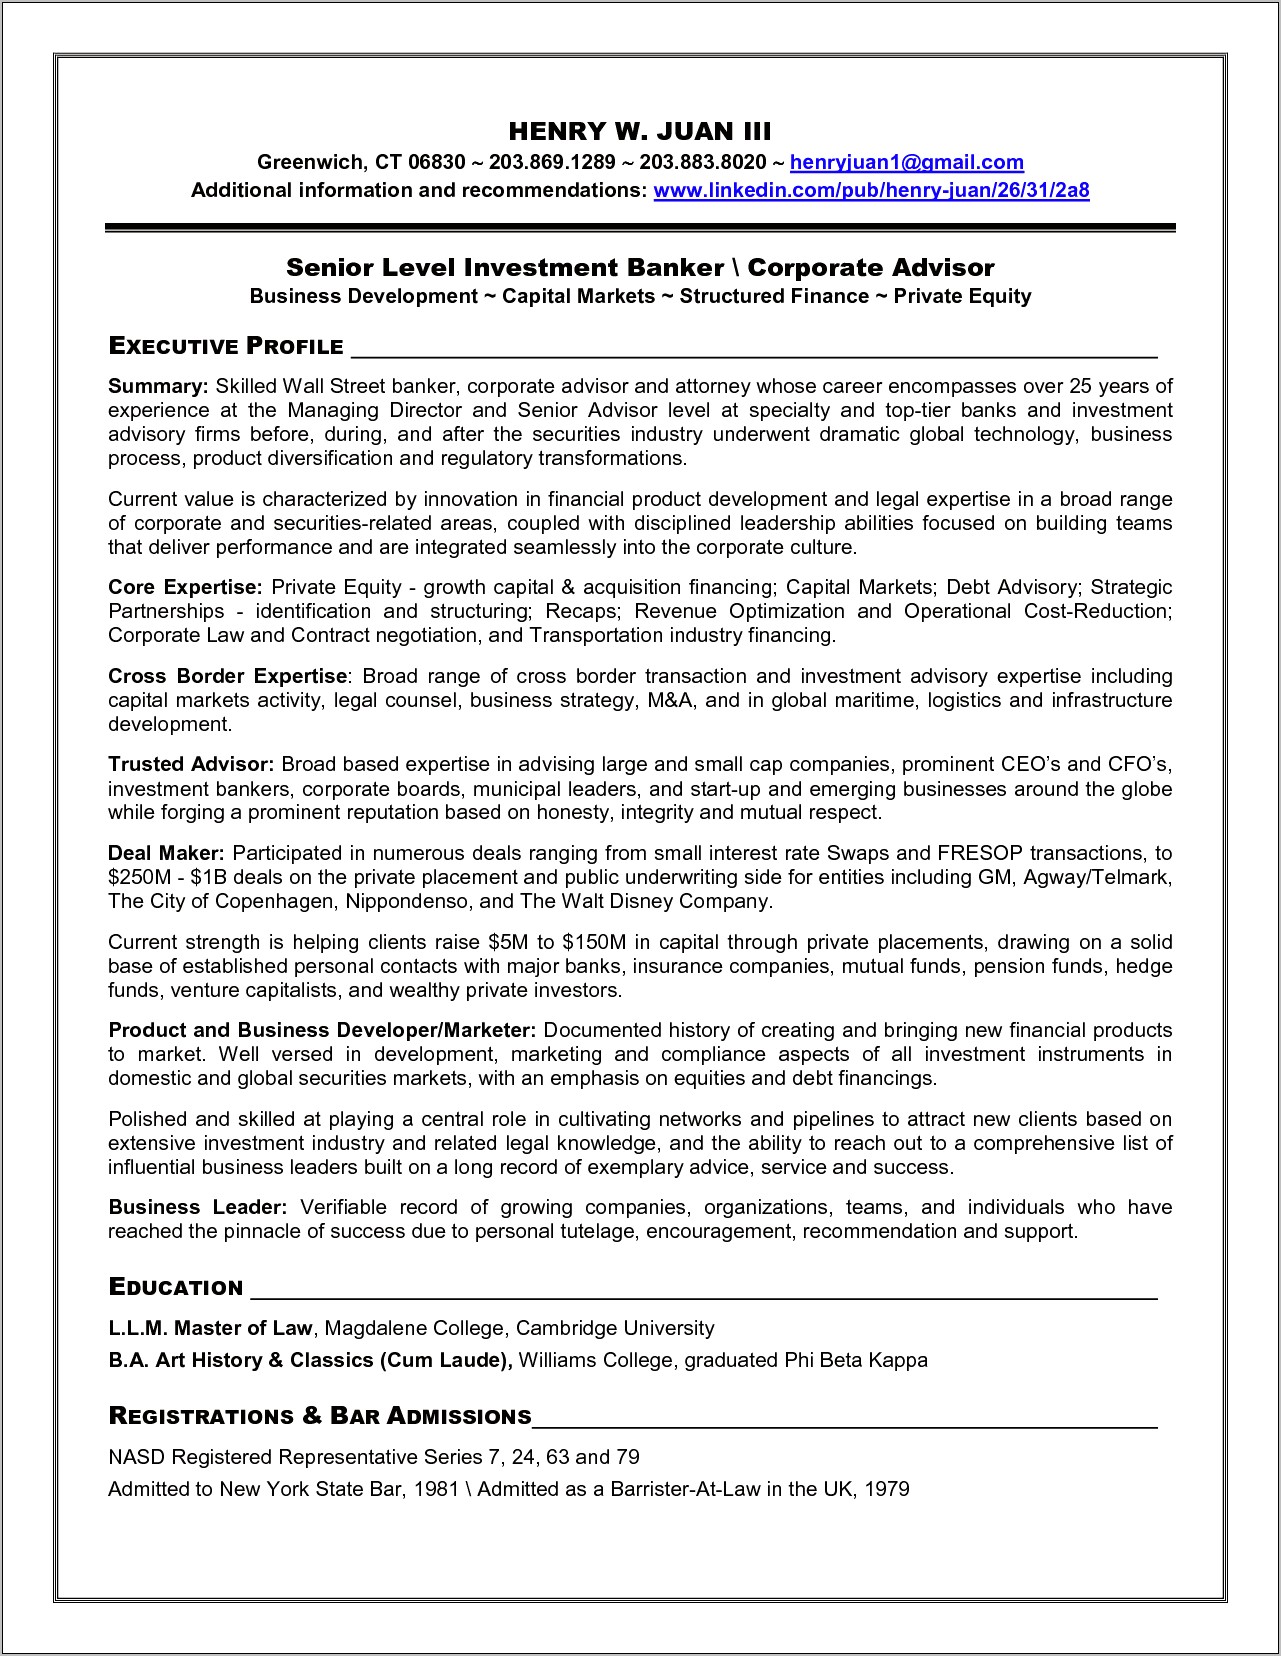 Resumes Careers Several Personal Summary Examples Pub